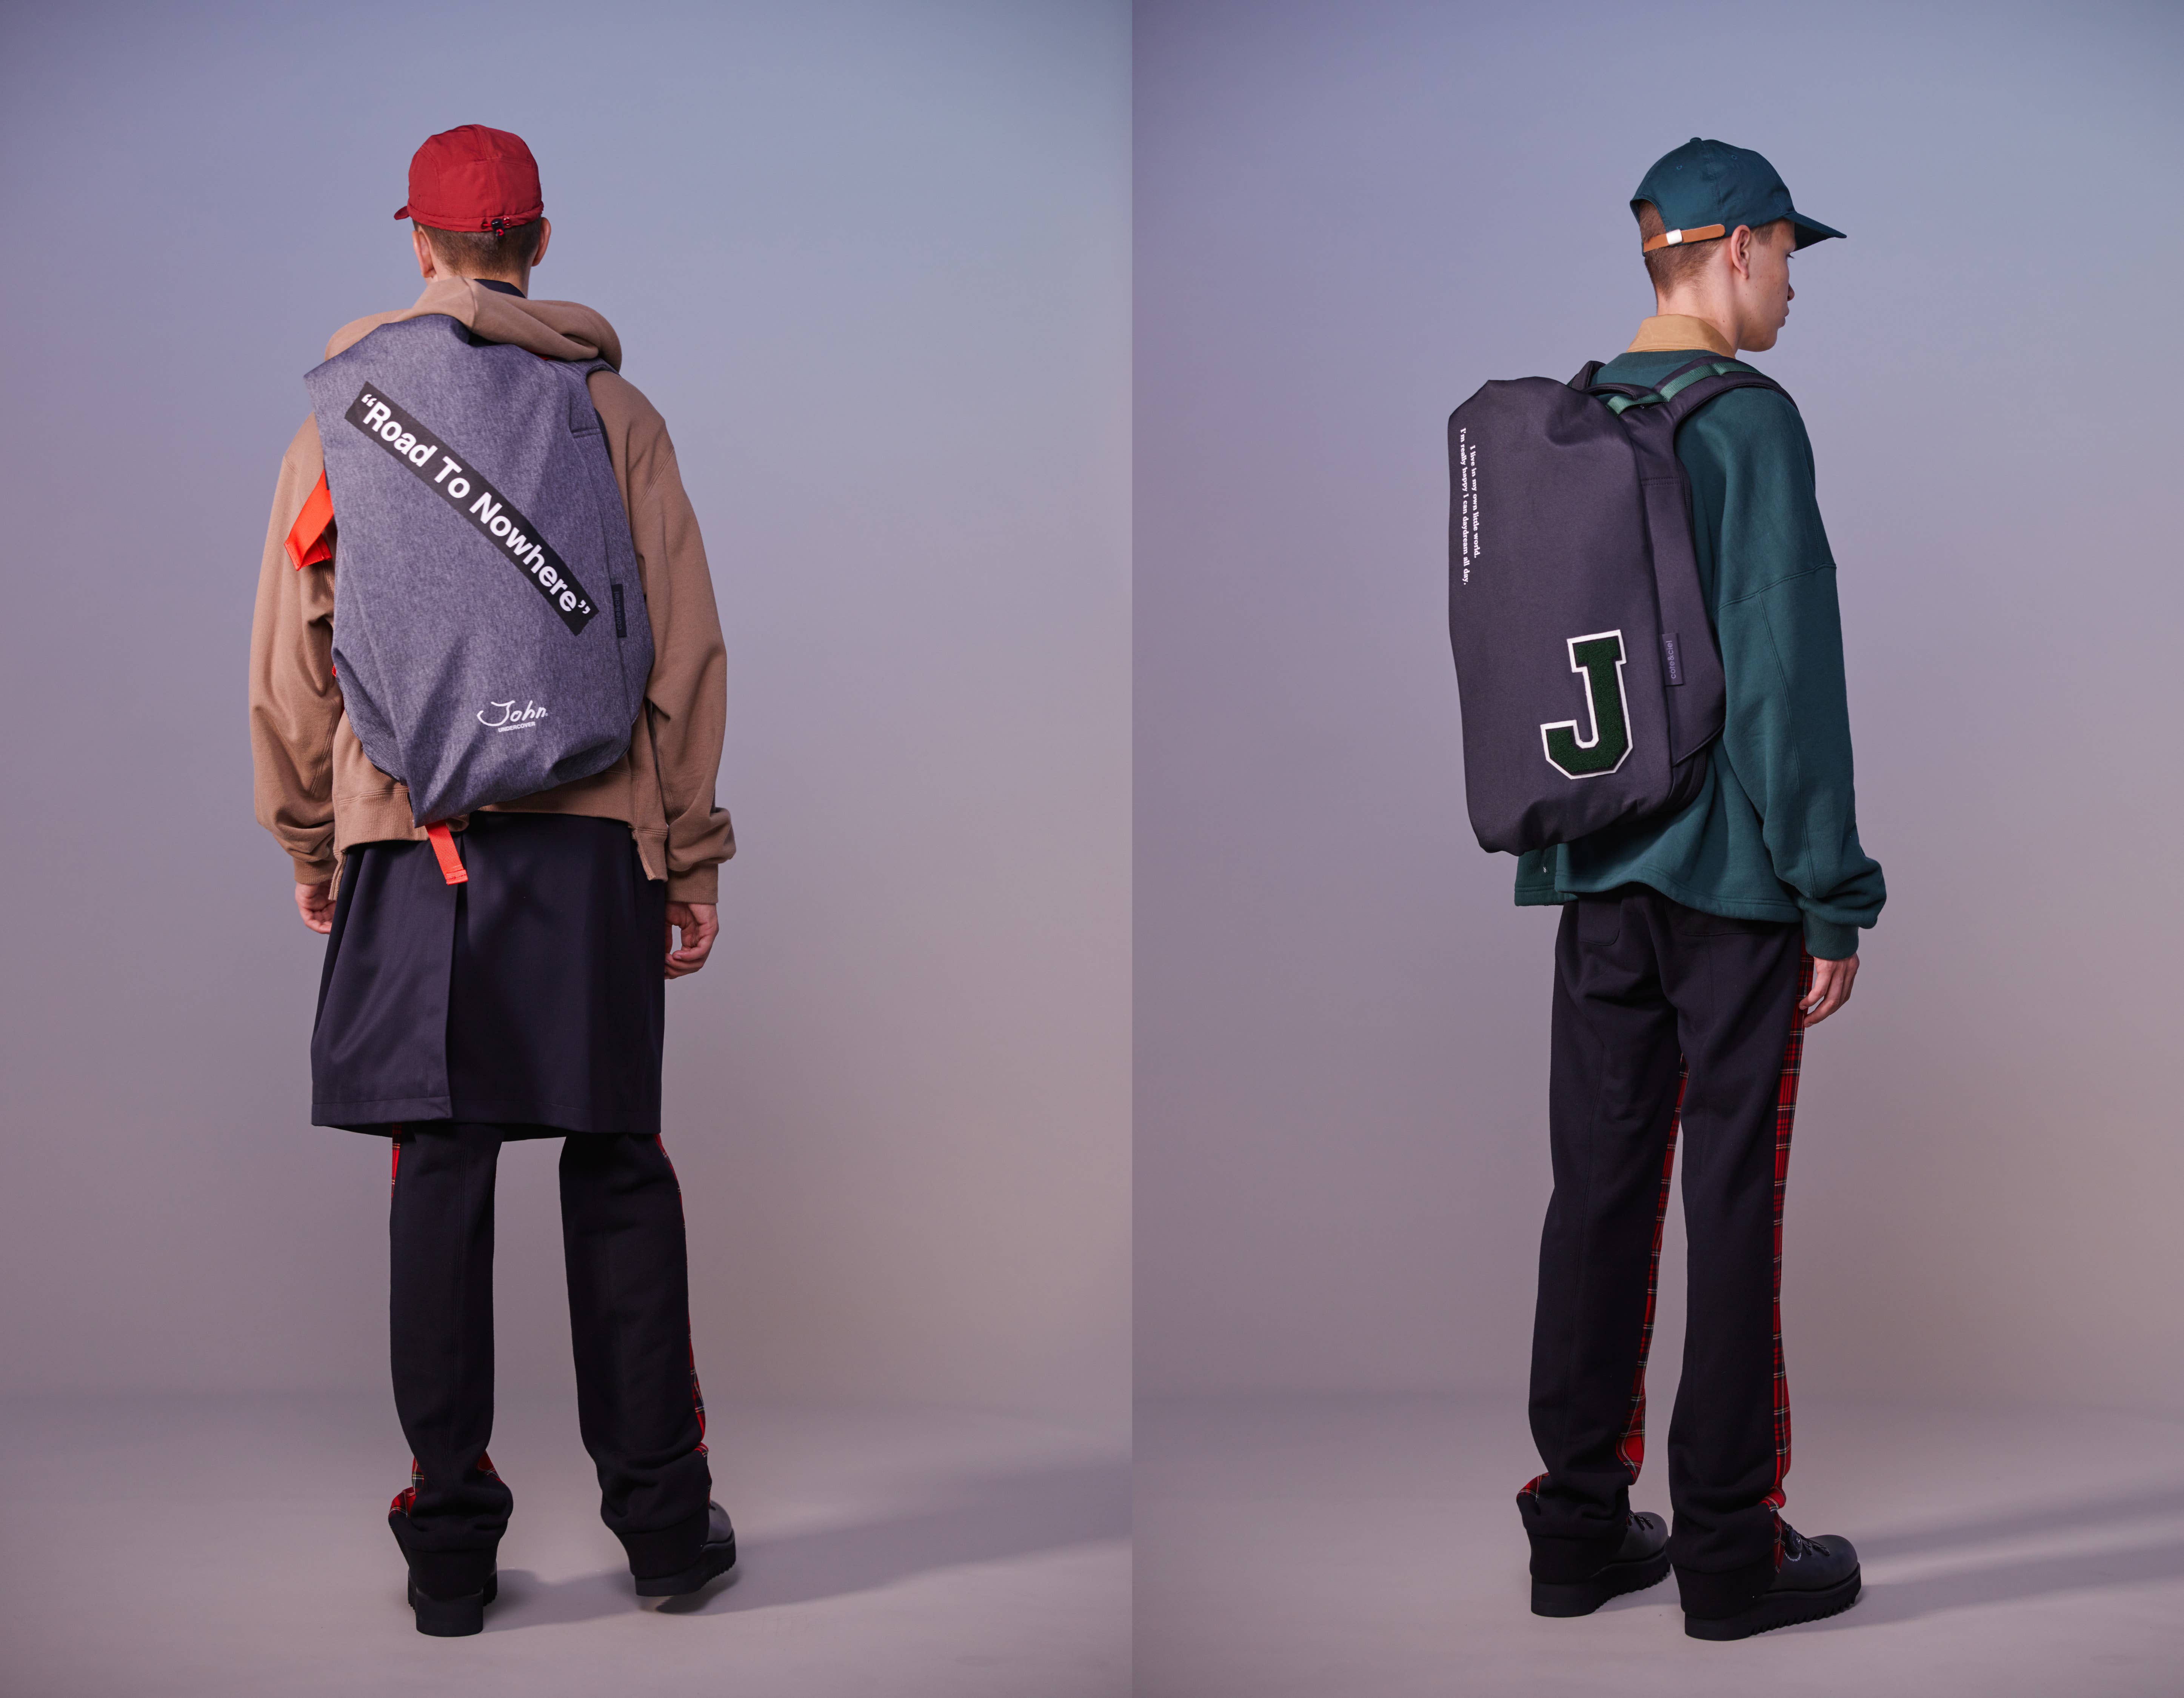 côte&ciel + JohnUNDERCOVER Link up for an Exclusive Isar